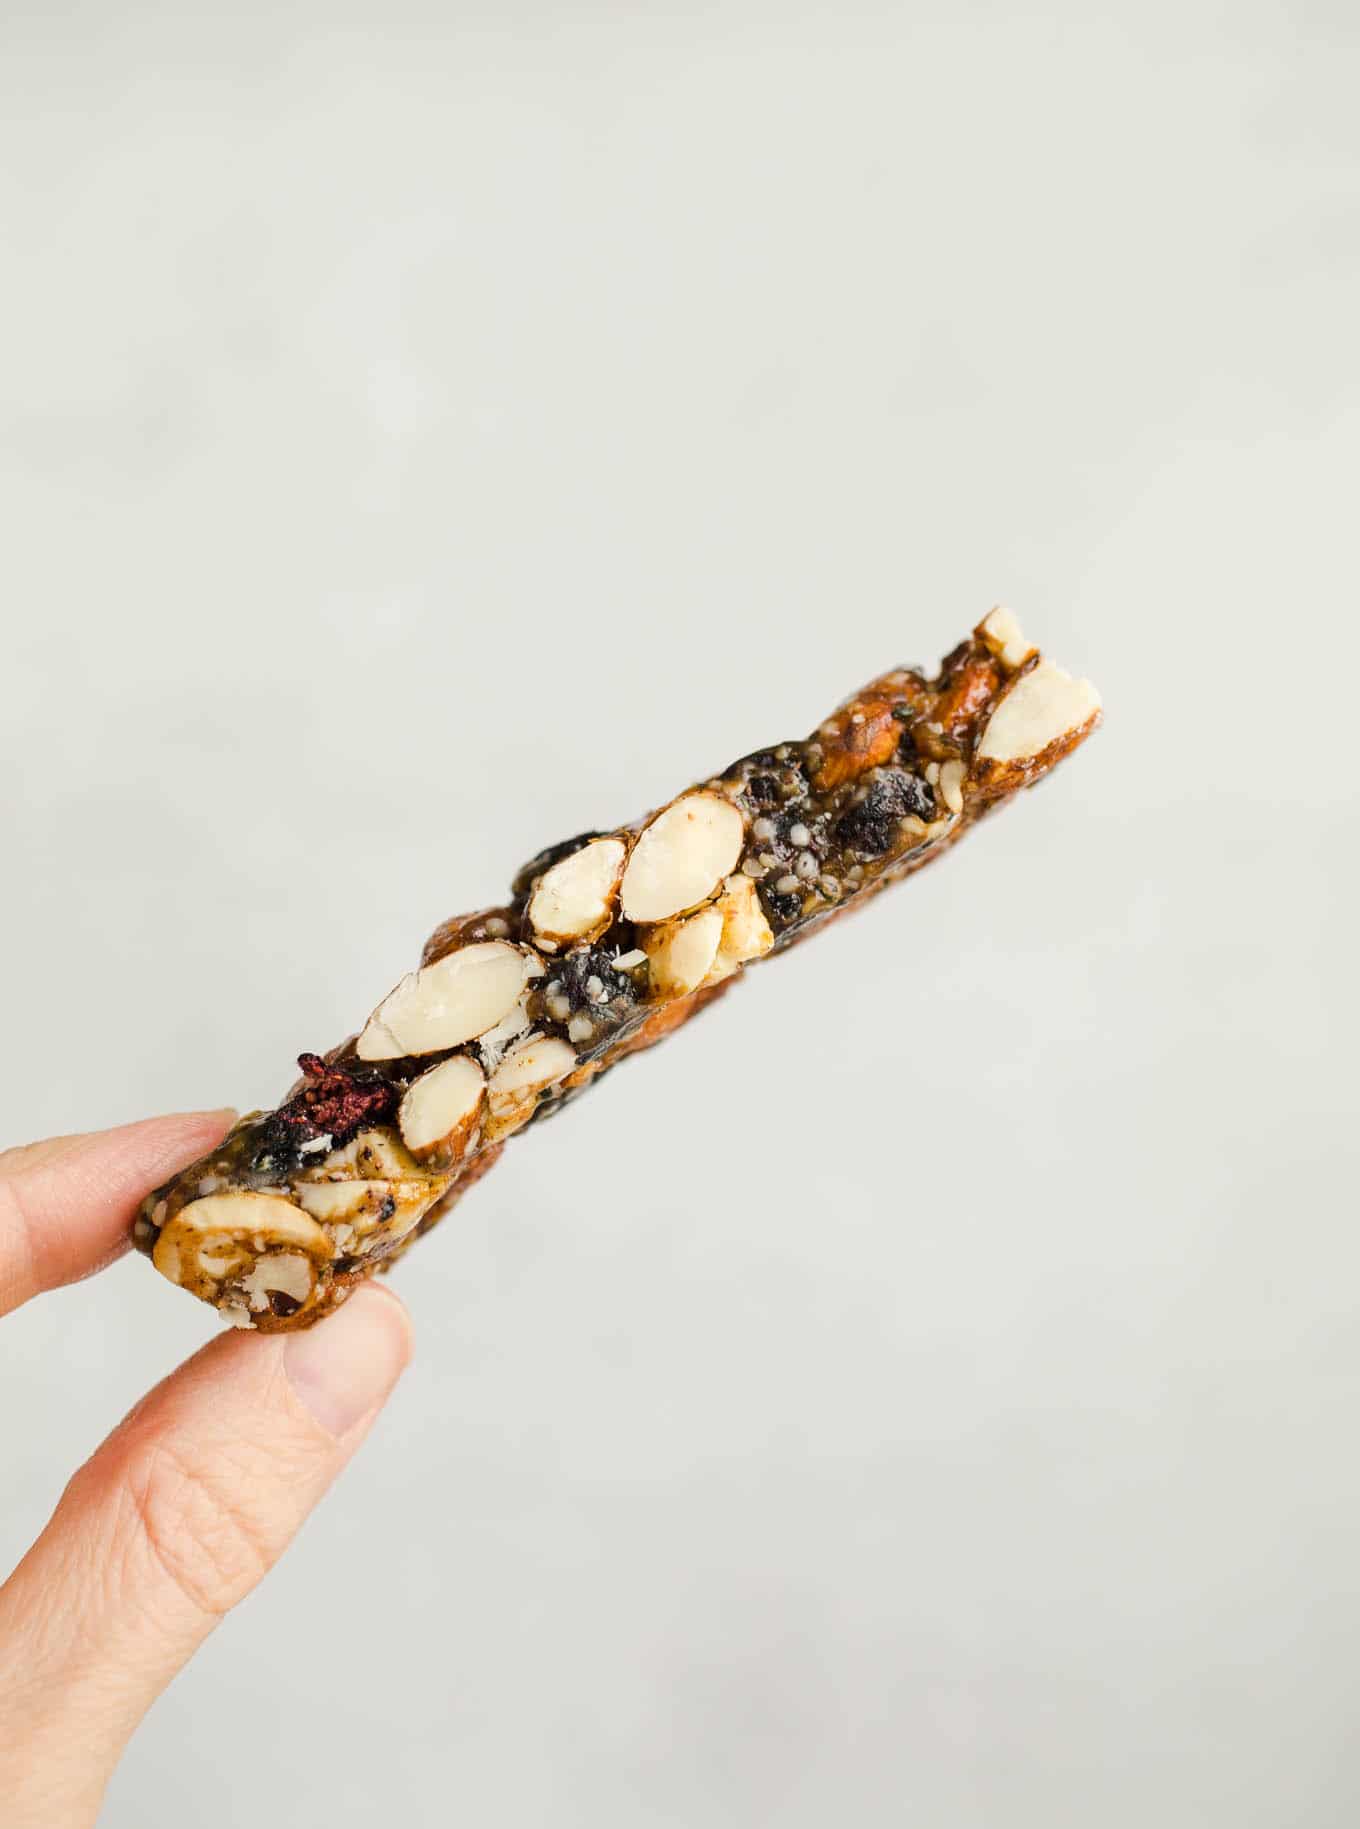 Blueberry Almond Granola Bars made with raw almonds, cashews, and hemp seeds, and bursting with dried blueberries. A healthy granola bars recipe made without refined sugar. Gluten-free, vegan. 